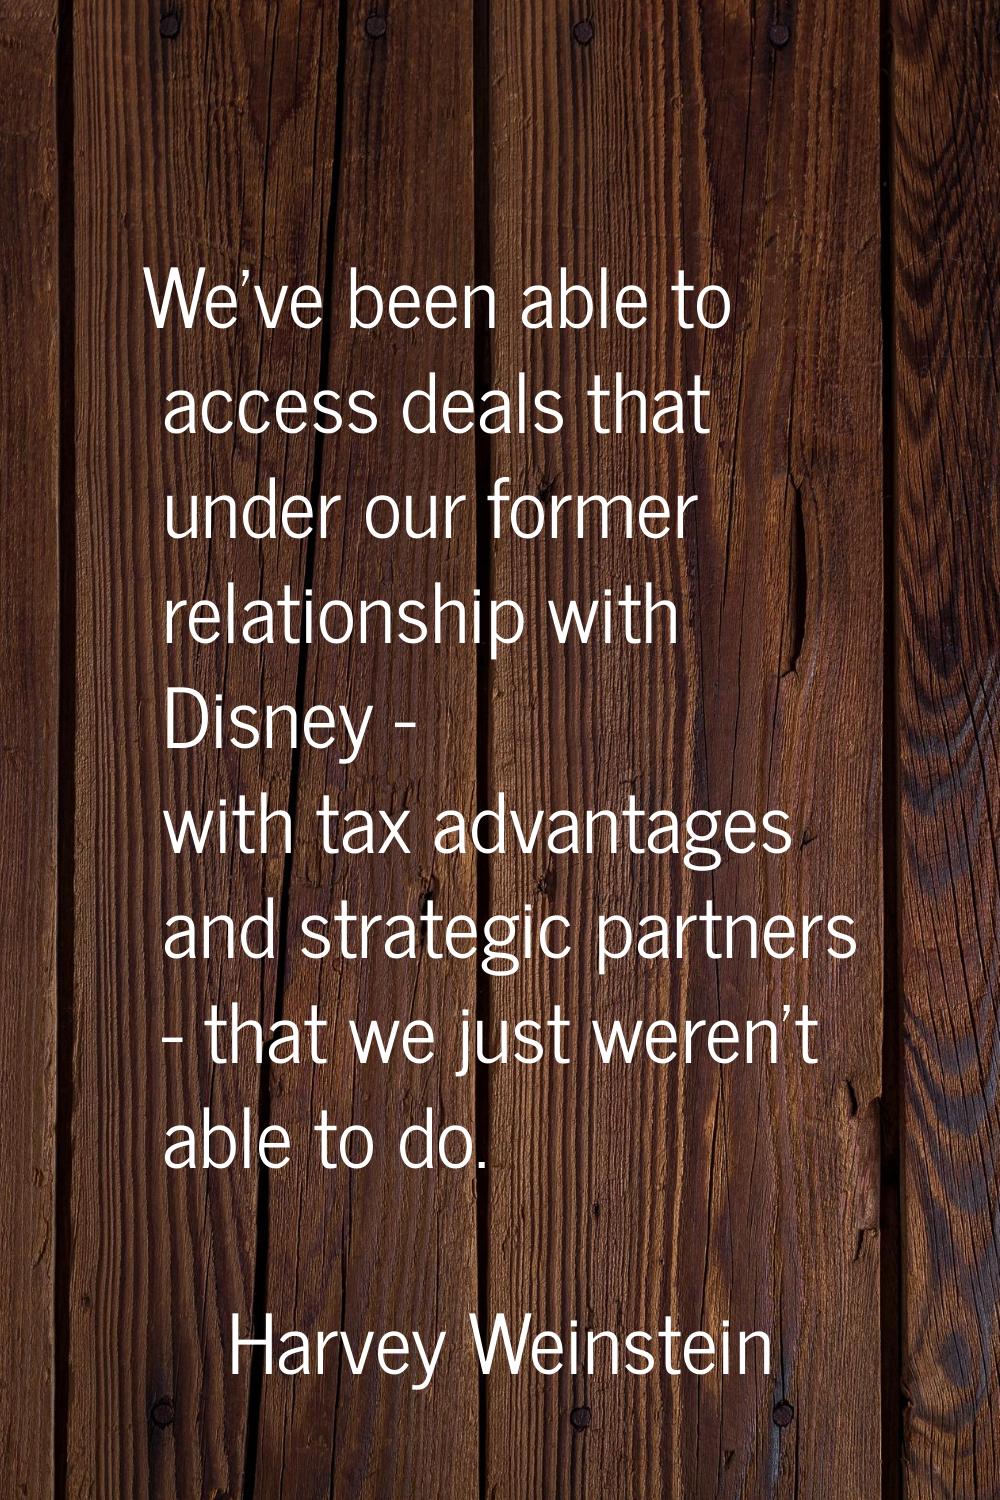 We've been able to access deals that under our former relationship with Disney - with tax advantage